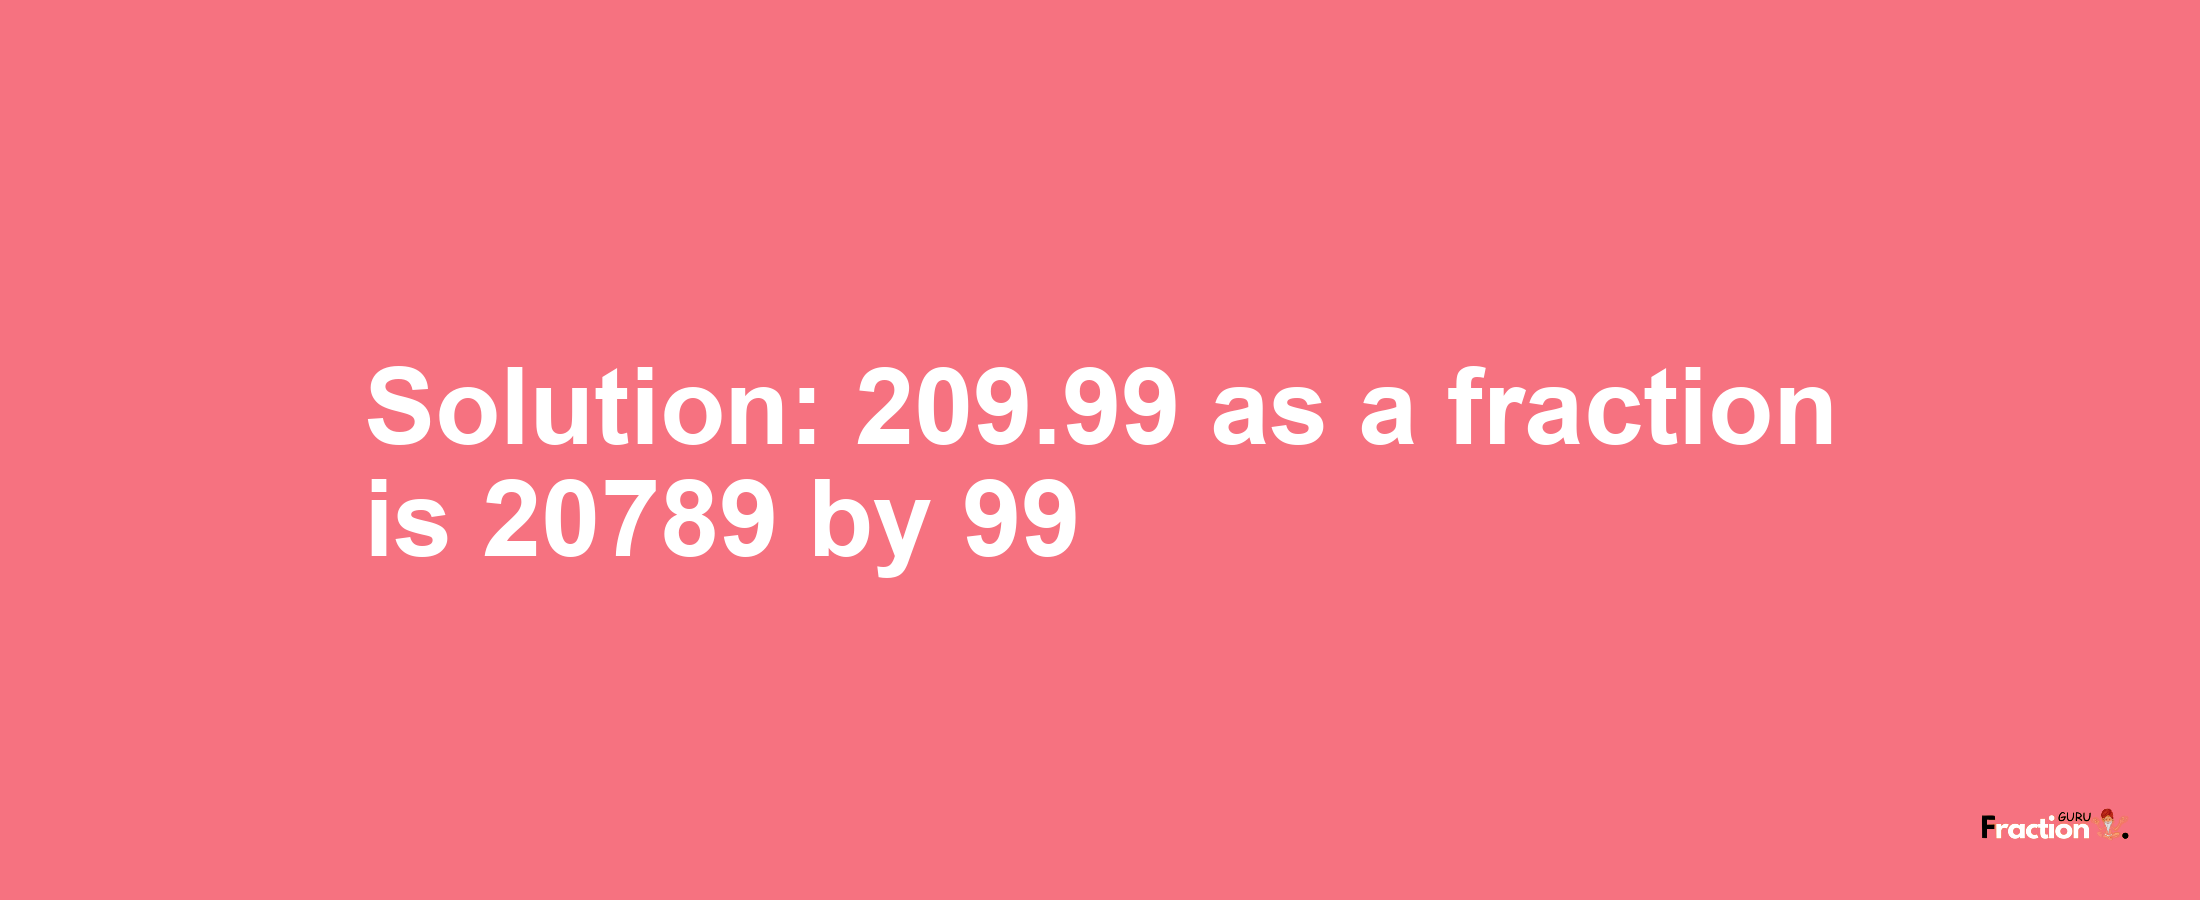 Solution:209.99 as a fraction is 20789/99